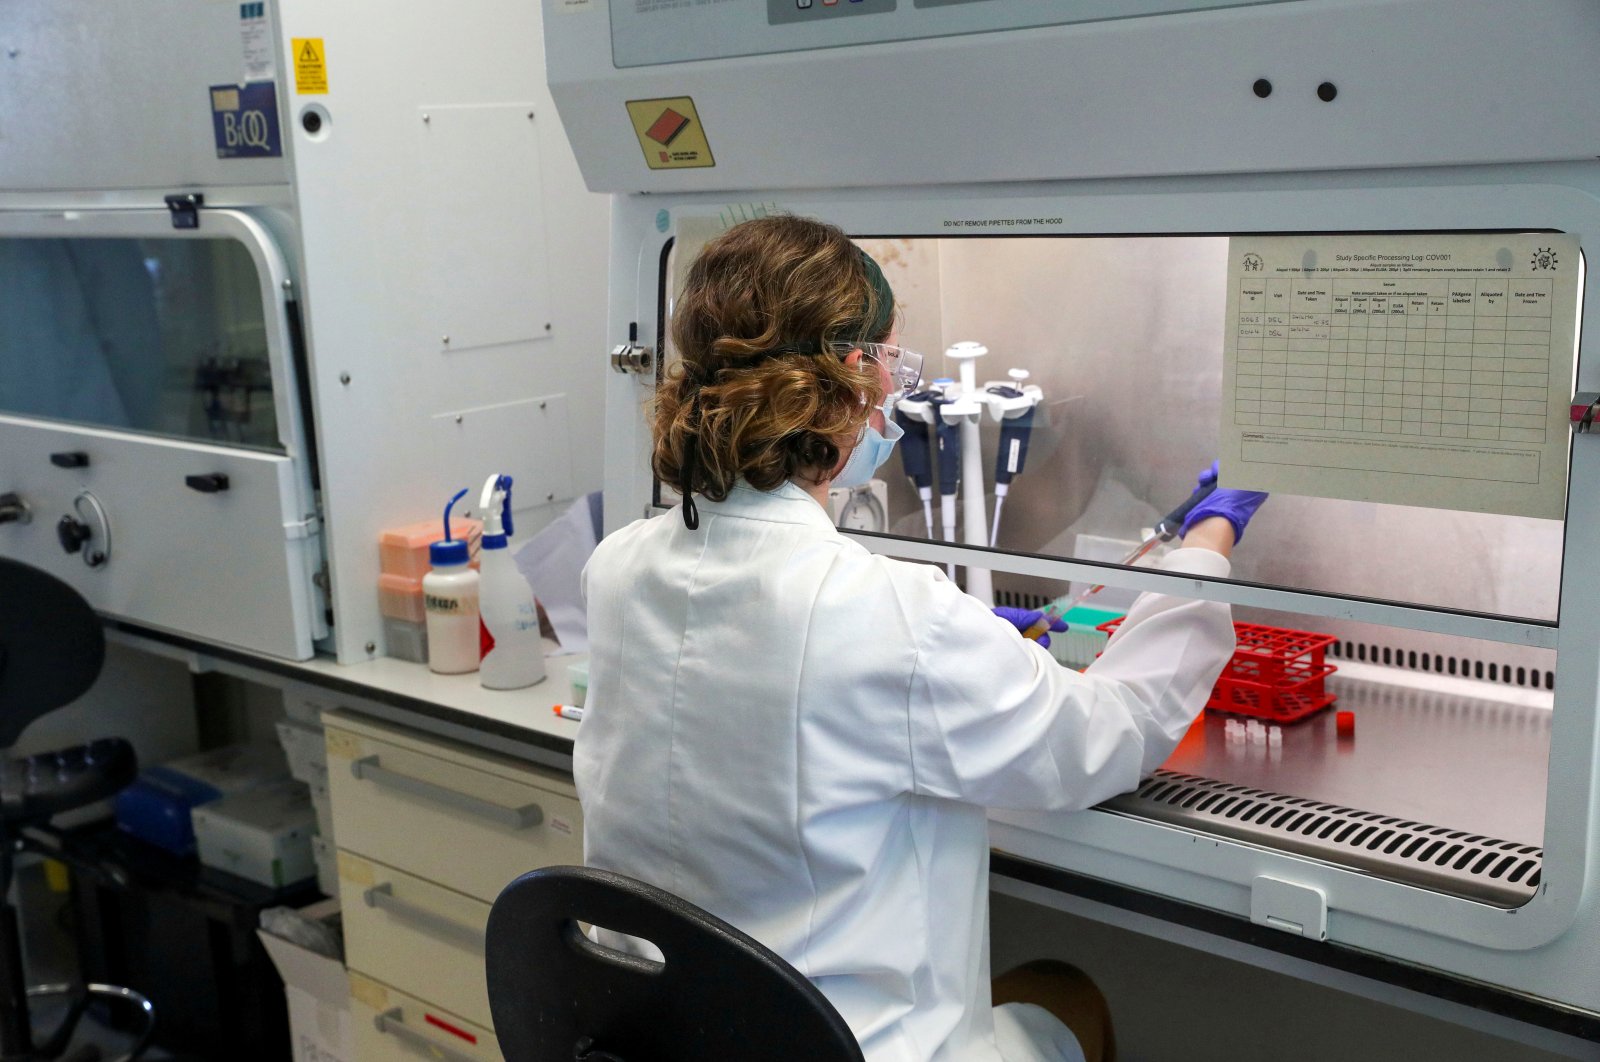 A scientist works at a manufacturing laboratory where a vaccine against the coronavirus disease (COVID-19) has been produced at the Oxford Vaccine Group's facility at the Churchill Hospital in Oxford, England, June 24, 2020. (Reuters Photo)